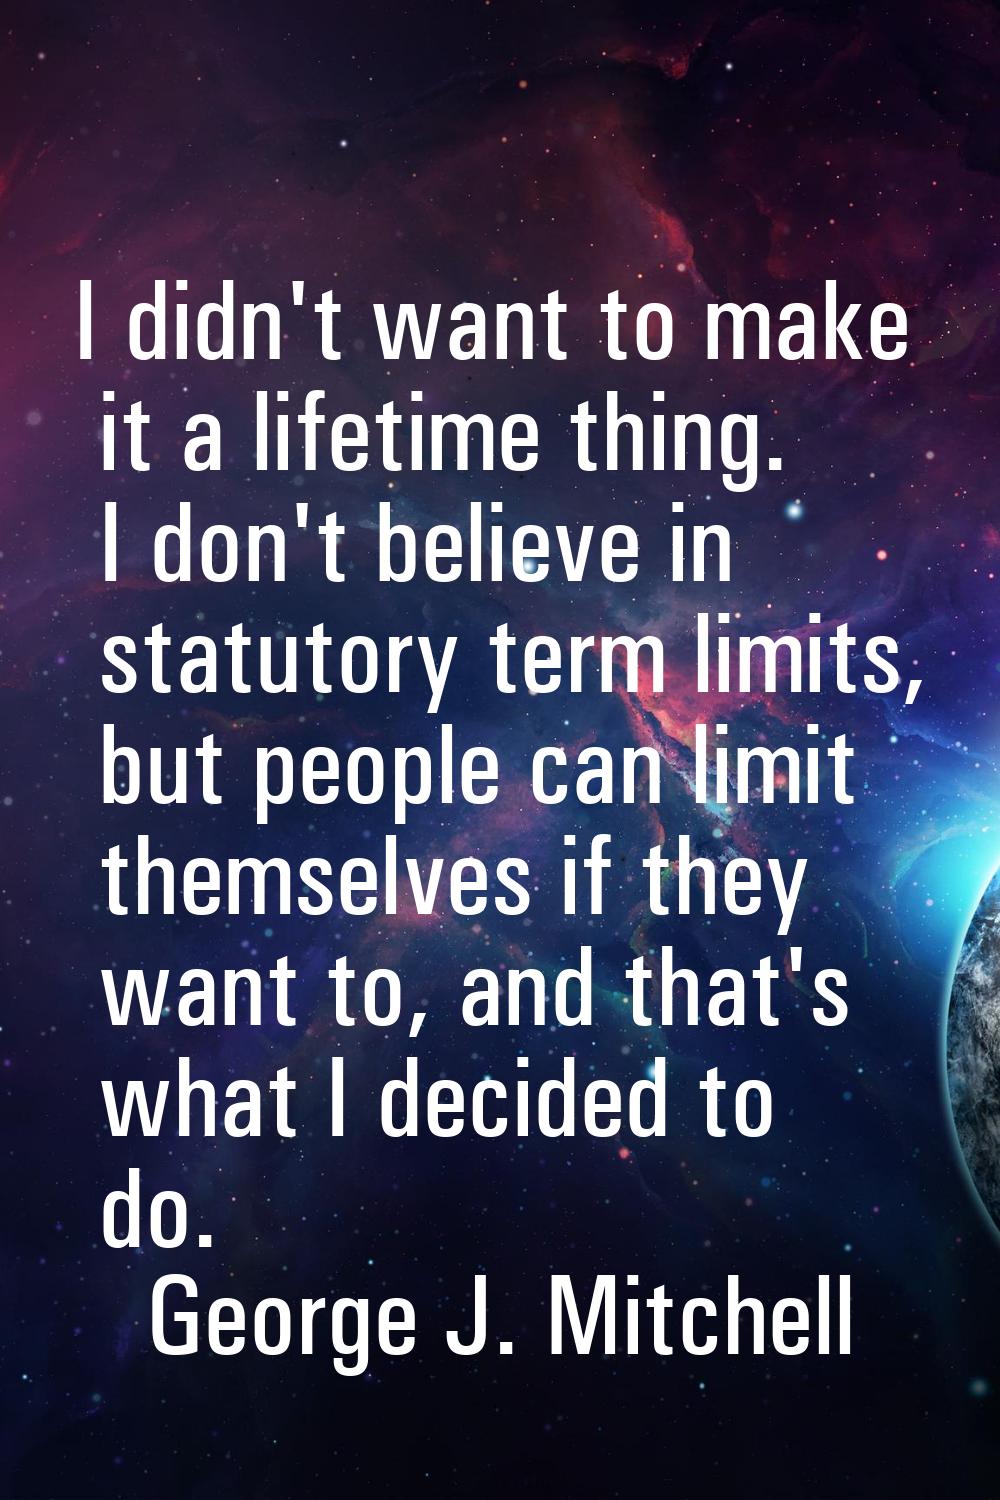 I didn't want to make it a lifetime thing. I don't believe in statutory term limits, but people can